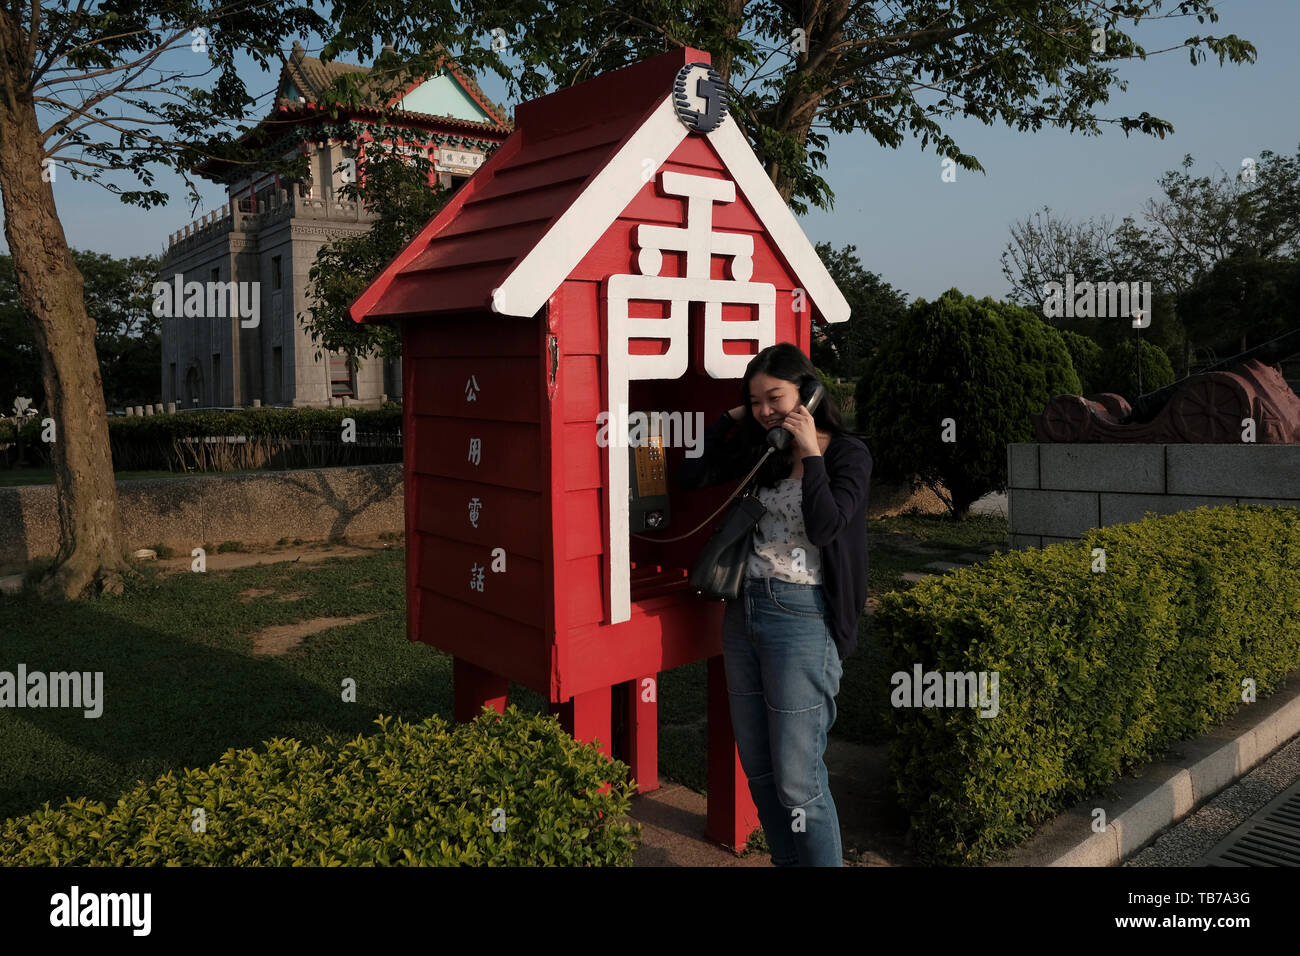 Woman speaking in a red phone booth with the word Jīnmen or Golden Gate which means Kinmen in front of Ju Guang Lou in Jincheng Township, Kinmen County or island, Taiwan Stock Photo